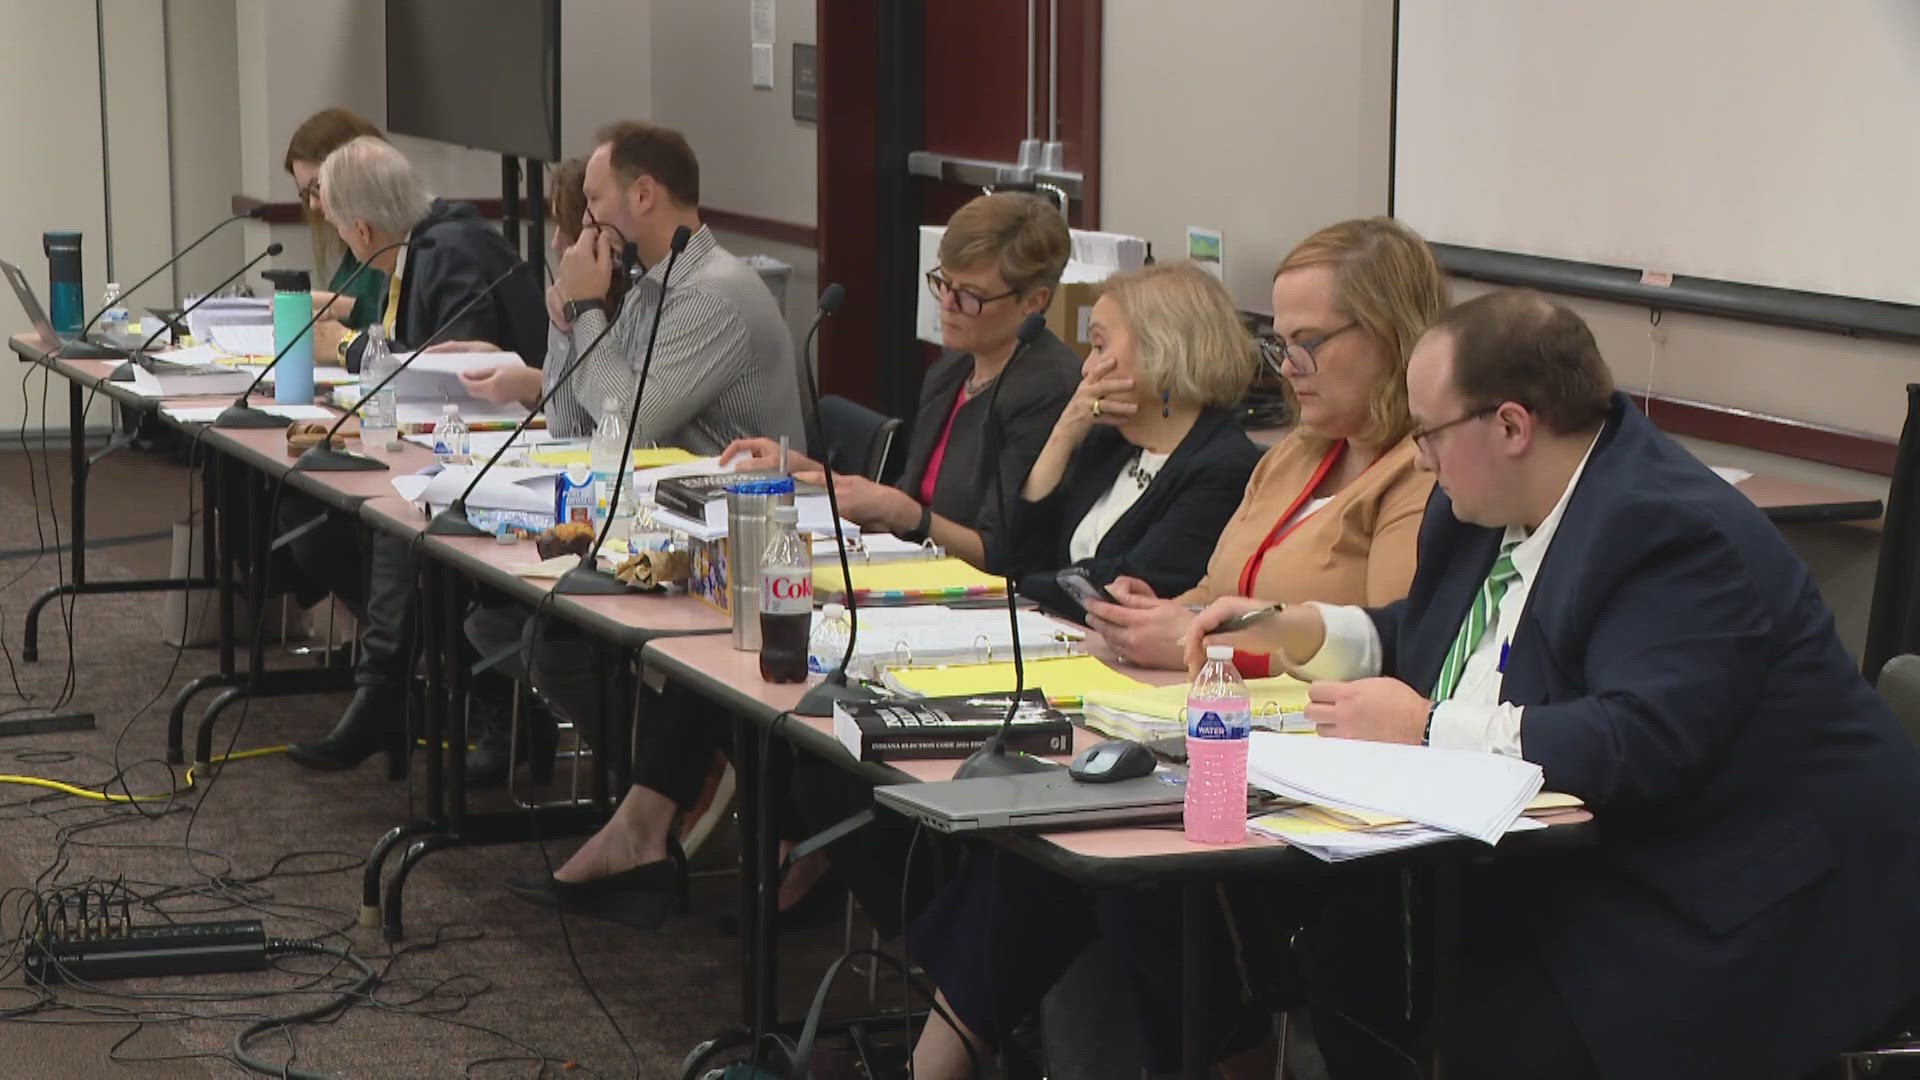 Indiana's Election Commission spent several hours hearing 30 challenges to candidates who want on the ballot.